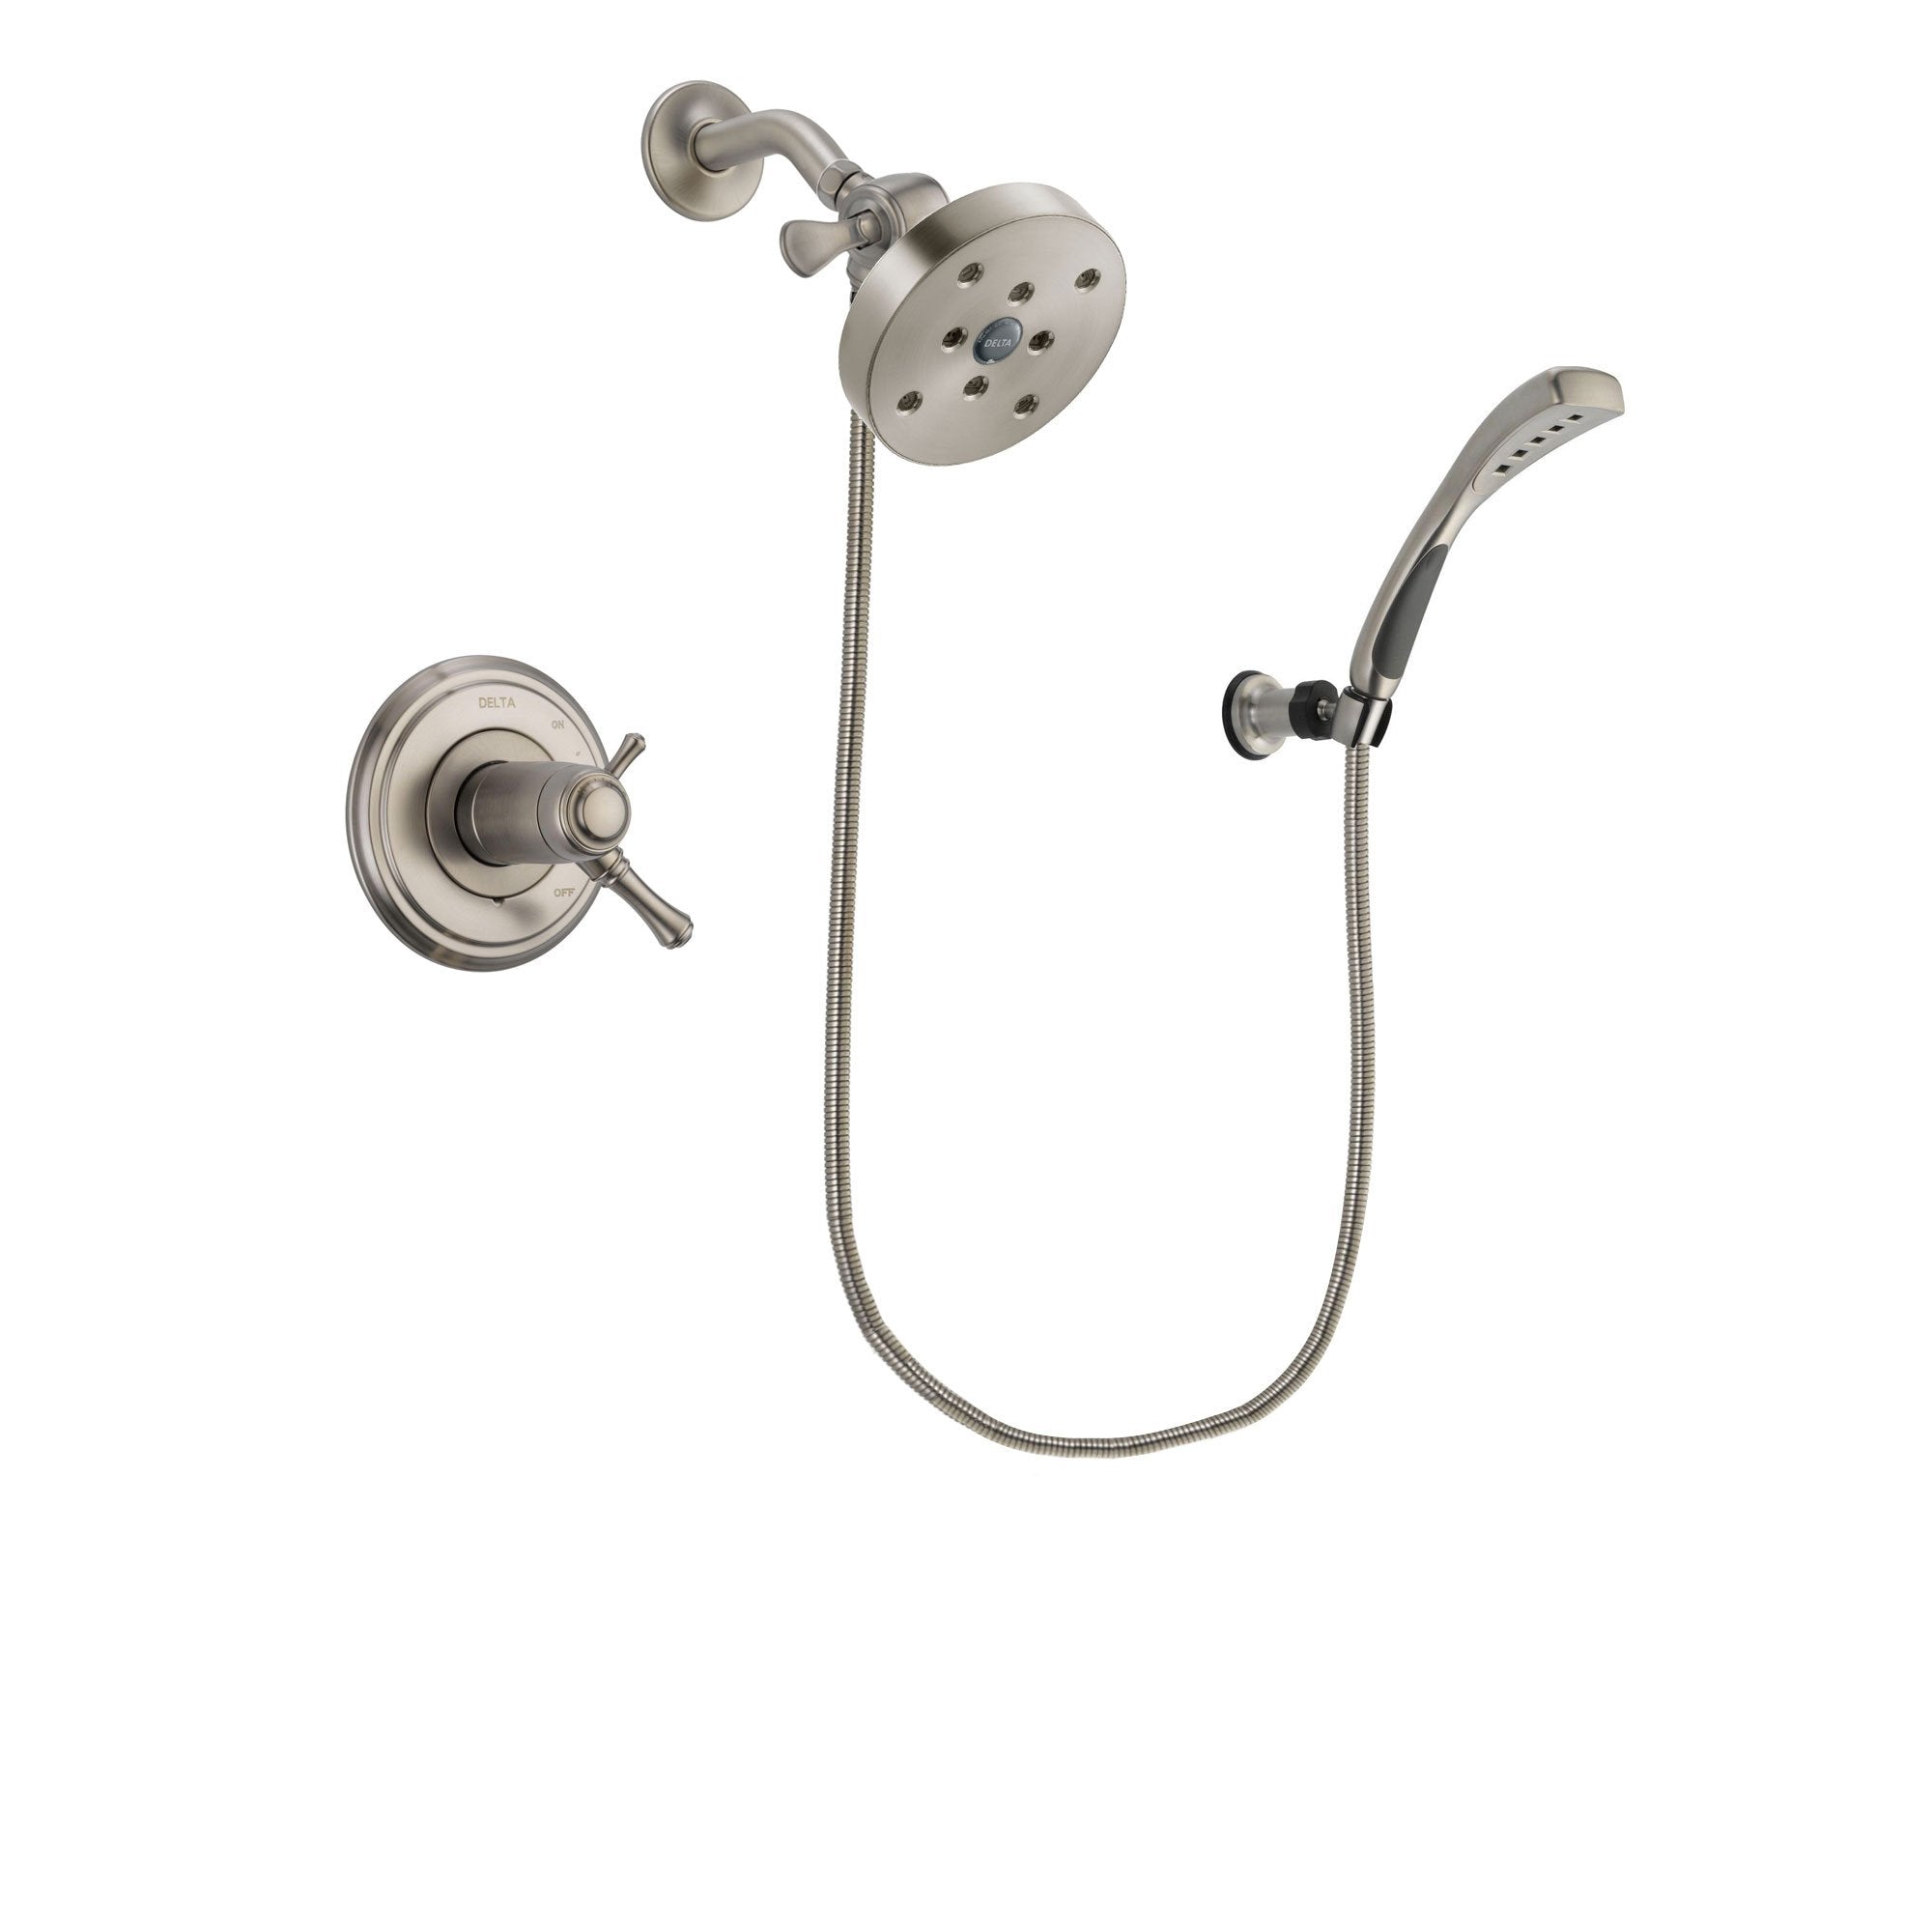 Delta Cassidy Stainless Steel Finish Thermostatic Shower Faucet System Package with 5-1/2 inch Shower Head and Wall Mounted Handshower Includes Rough-in Valve DSP1896V